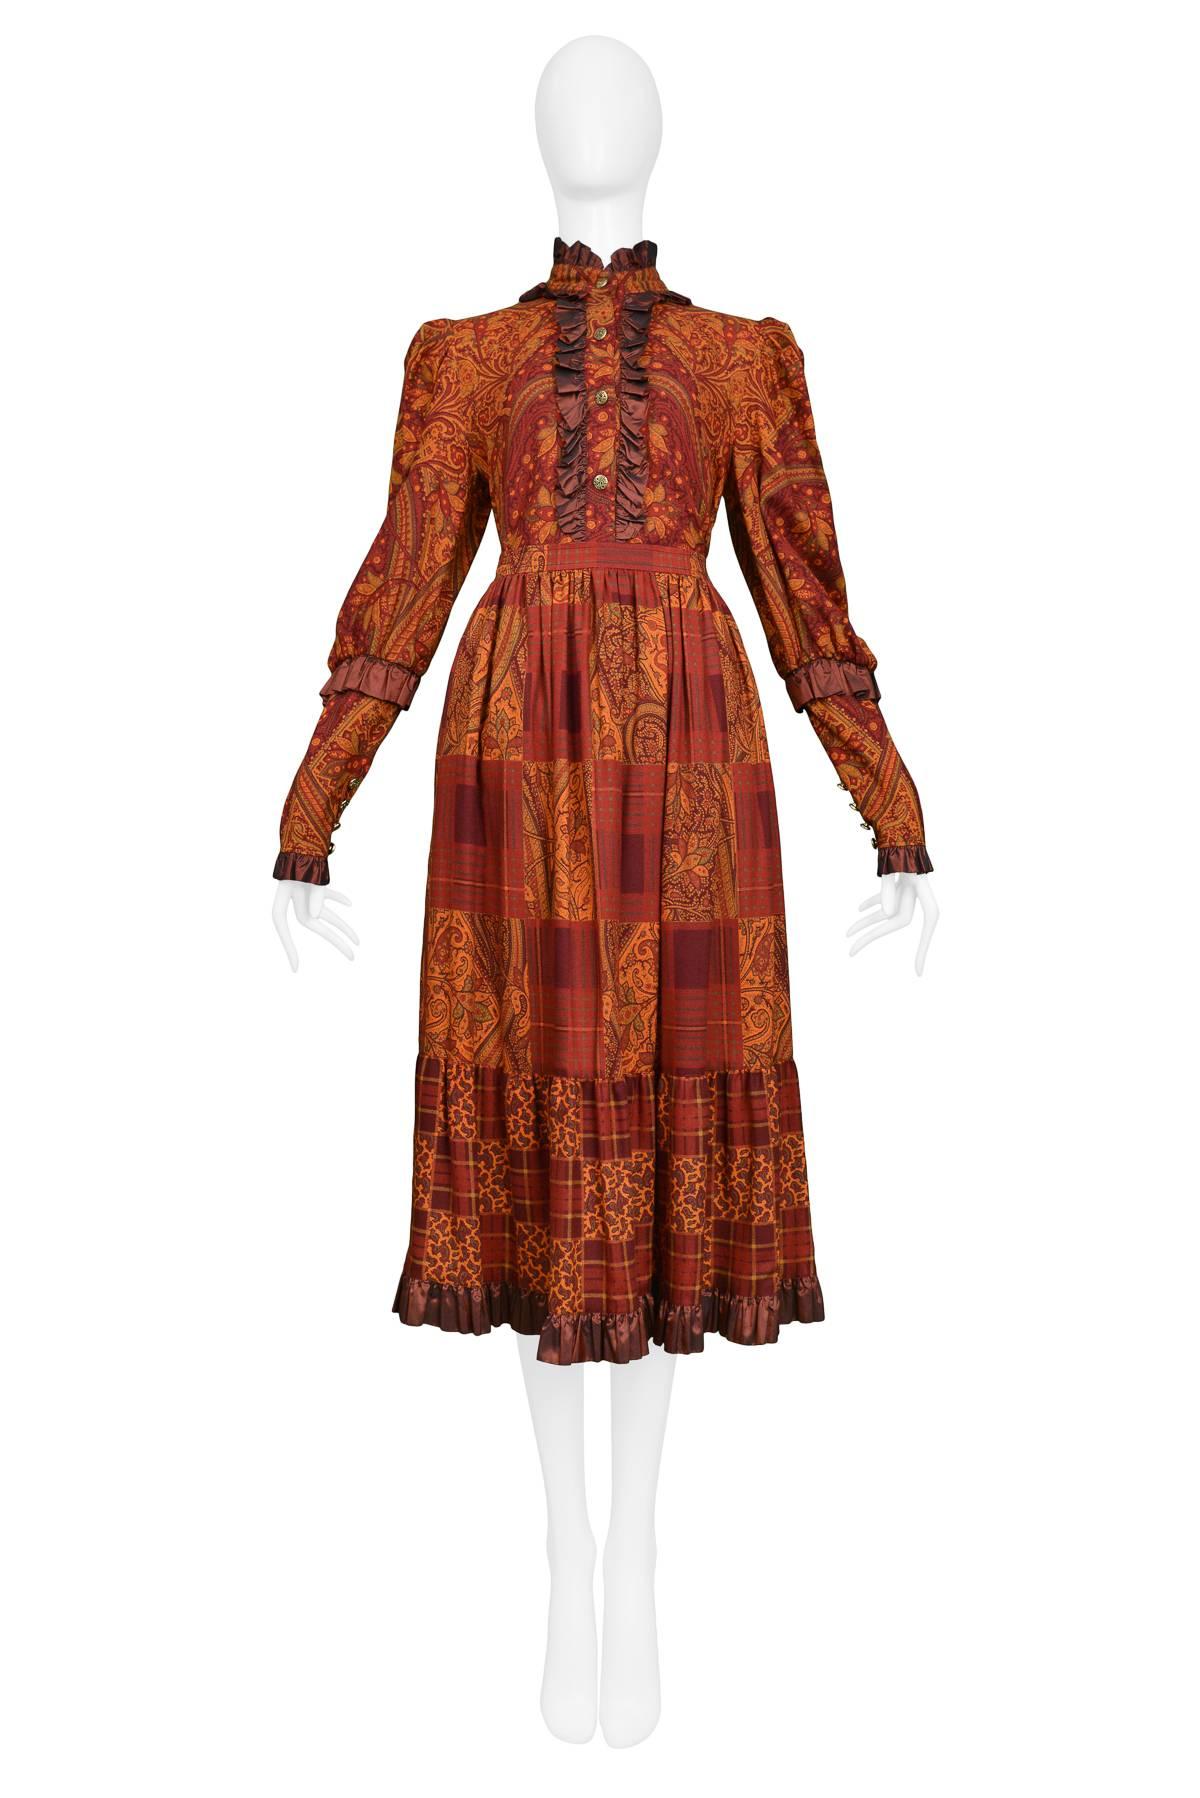 Resurrection Vintage is excited to offer a vintage autumn paisley wool skirt and blouse ensemble featuring a blouse with taffeta trim at the collar, cuffs, and hem, gold buttons on the cuffs, and a matching skirt with waistband, side zipper, and